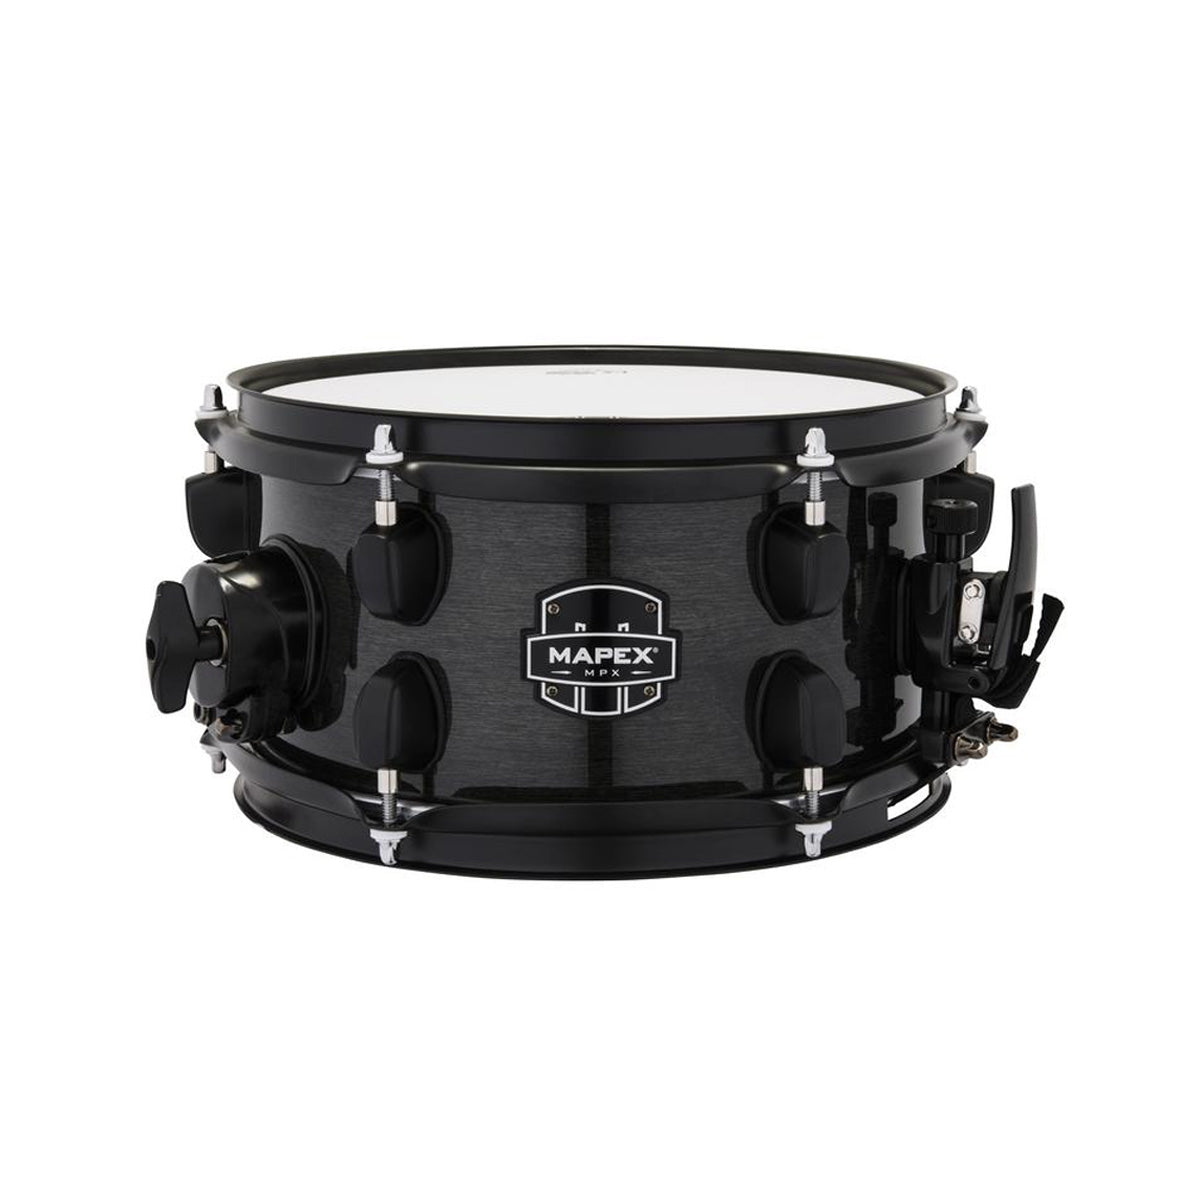 Mapex MPX 10"x5.5" Hybrid Shell Snare Drum in Black